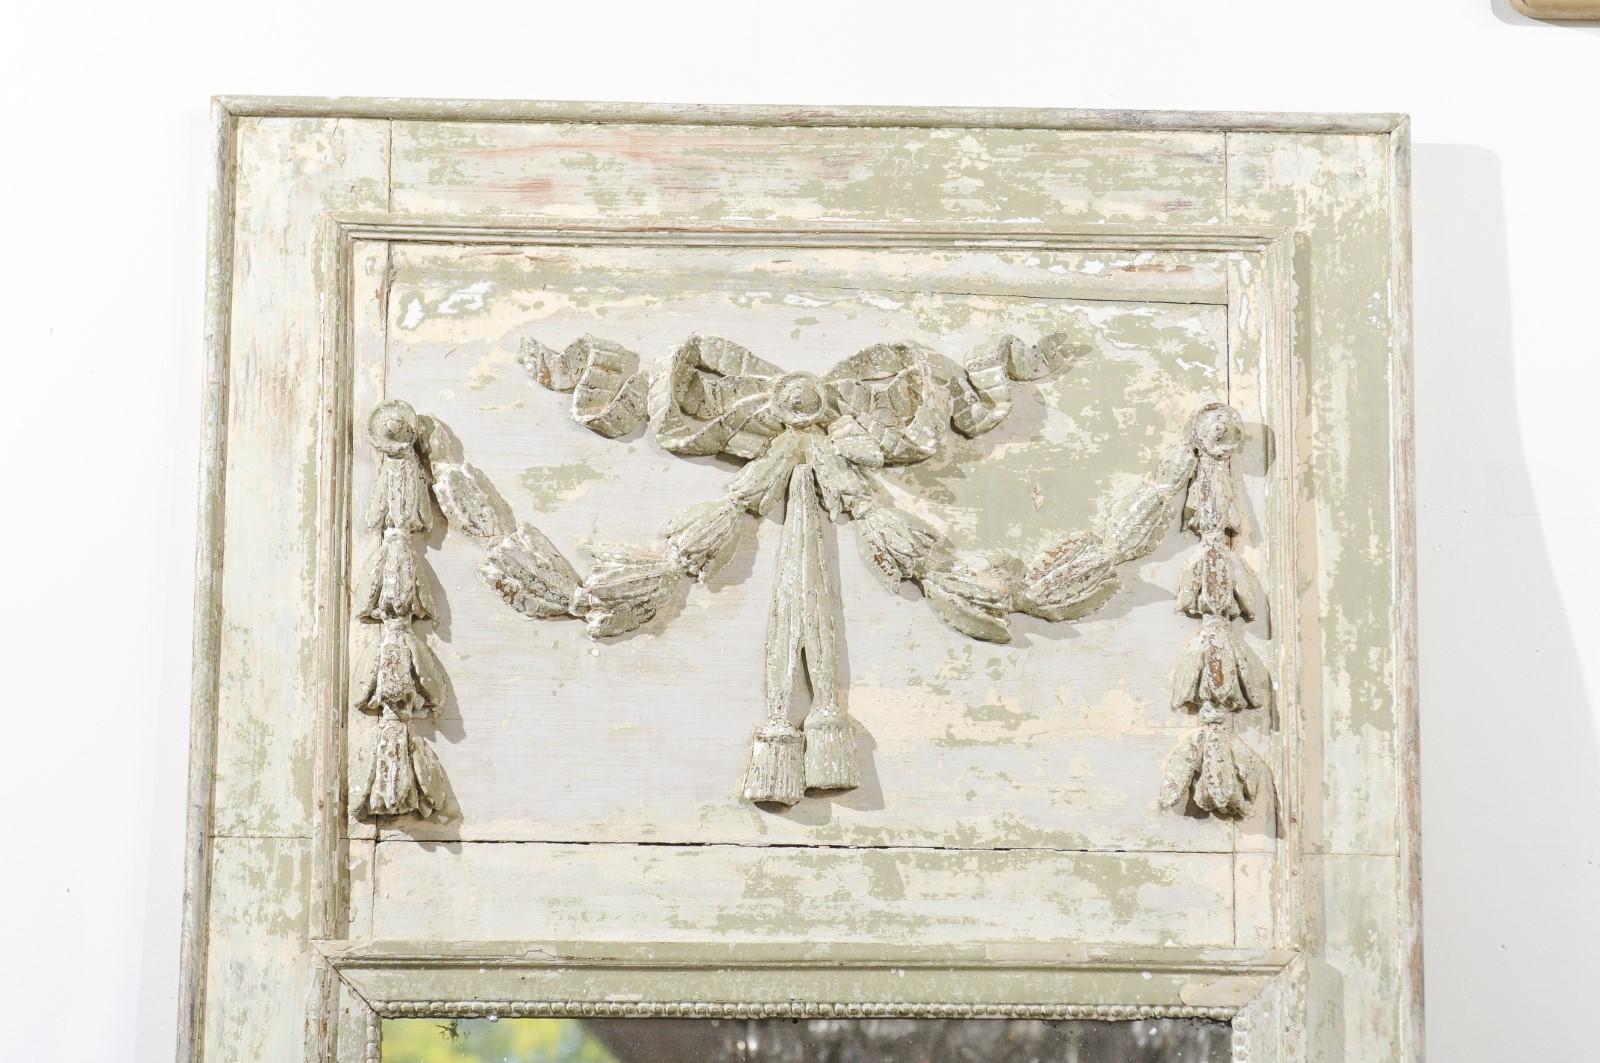 French Louis XVI Period 18th Century Painted Trumeau Mirror with Carved Garland 1